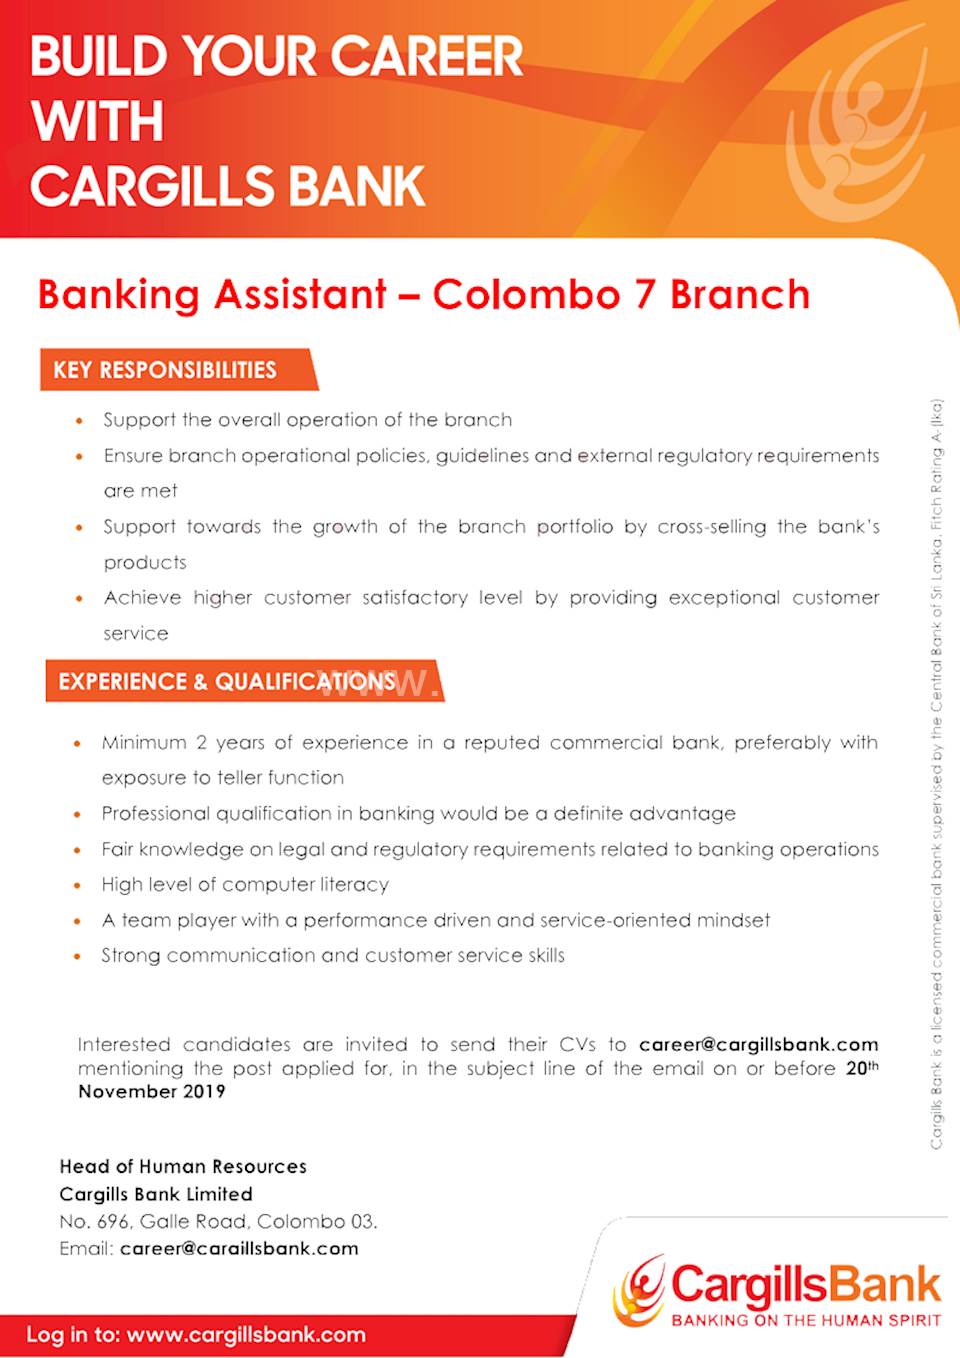 Banking Assistant - Colombo 7 Branch